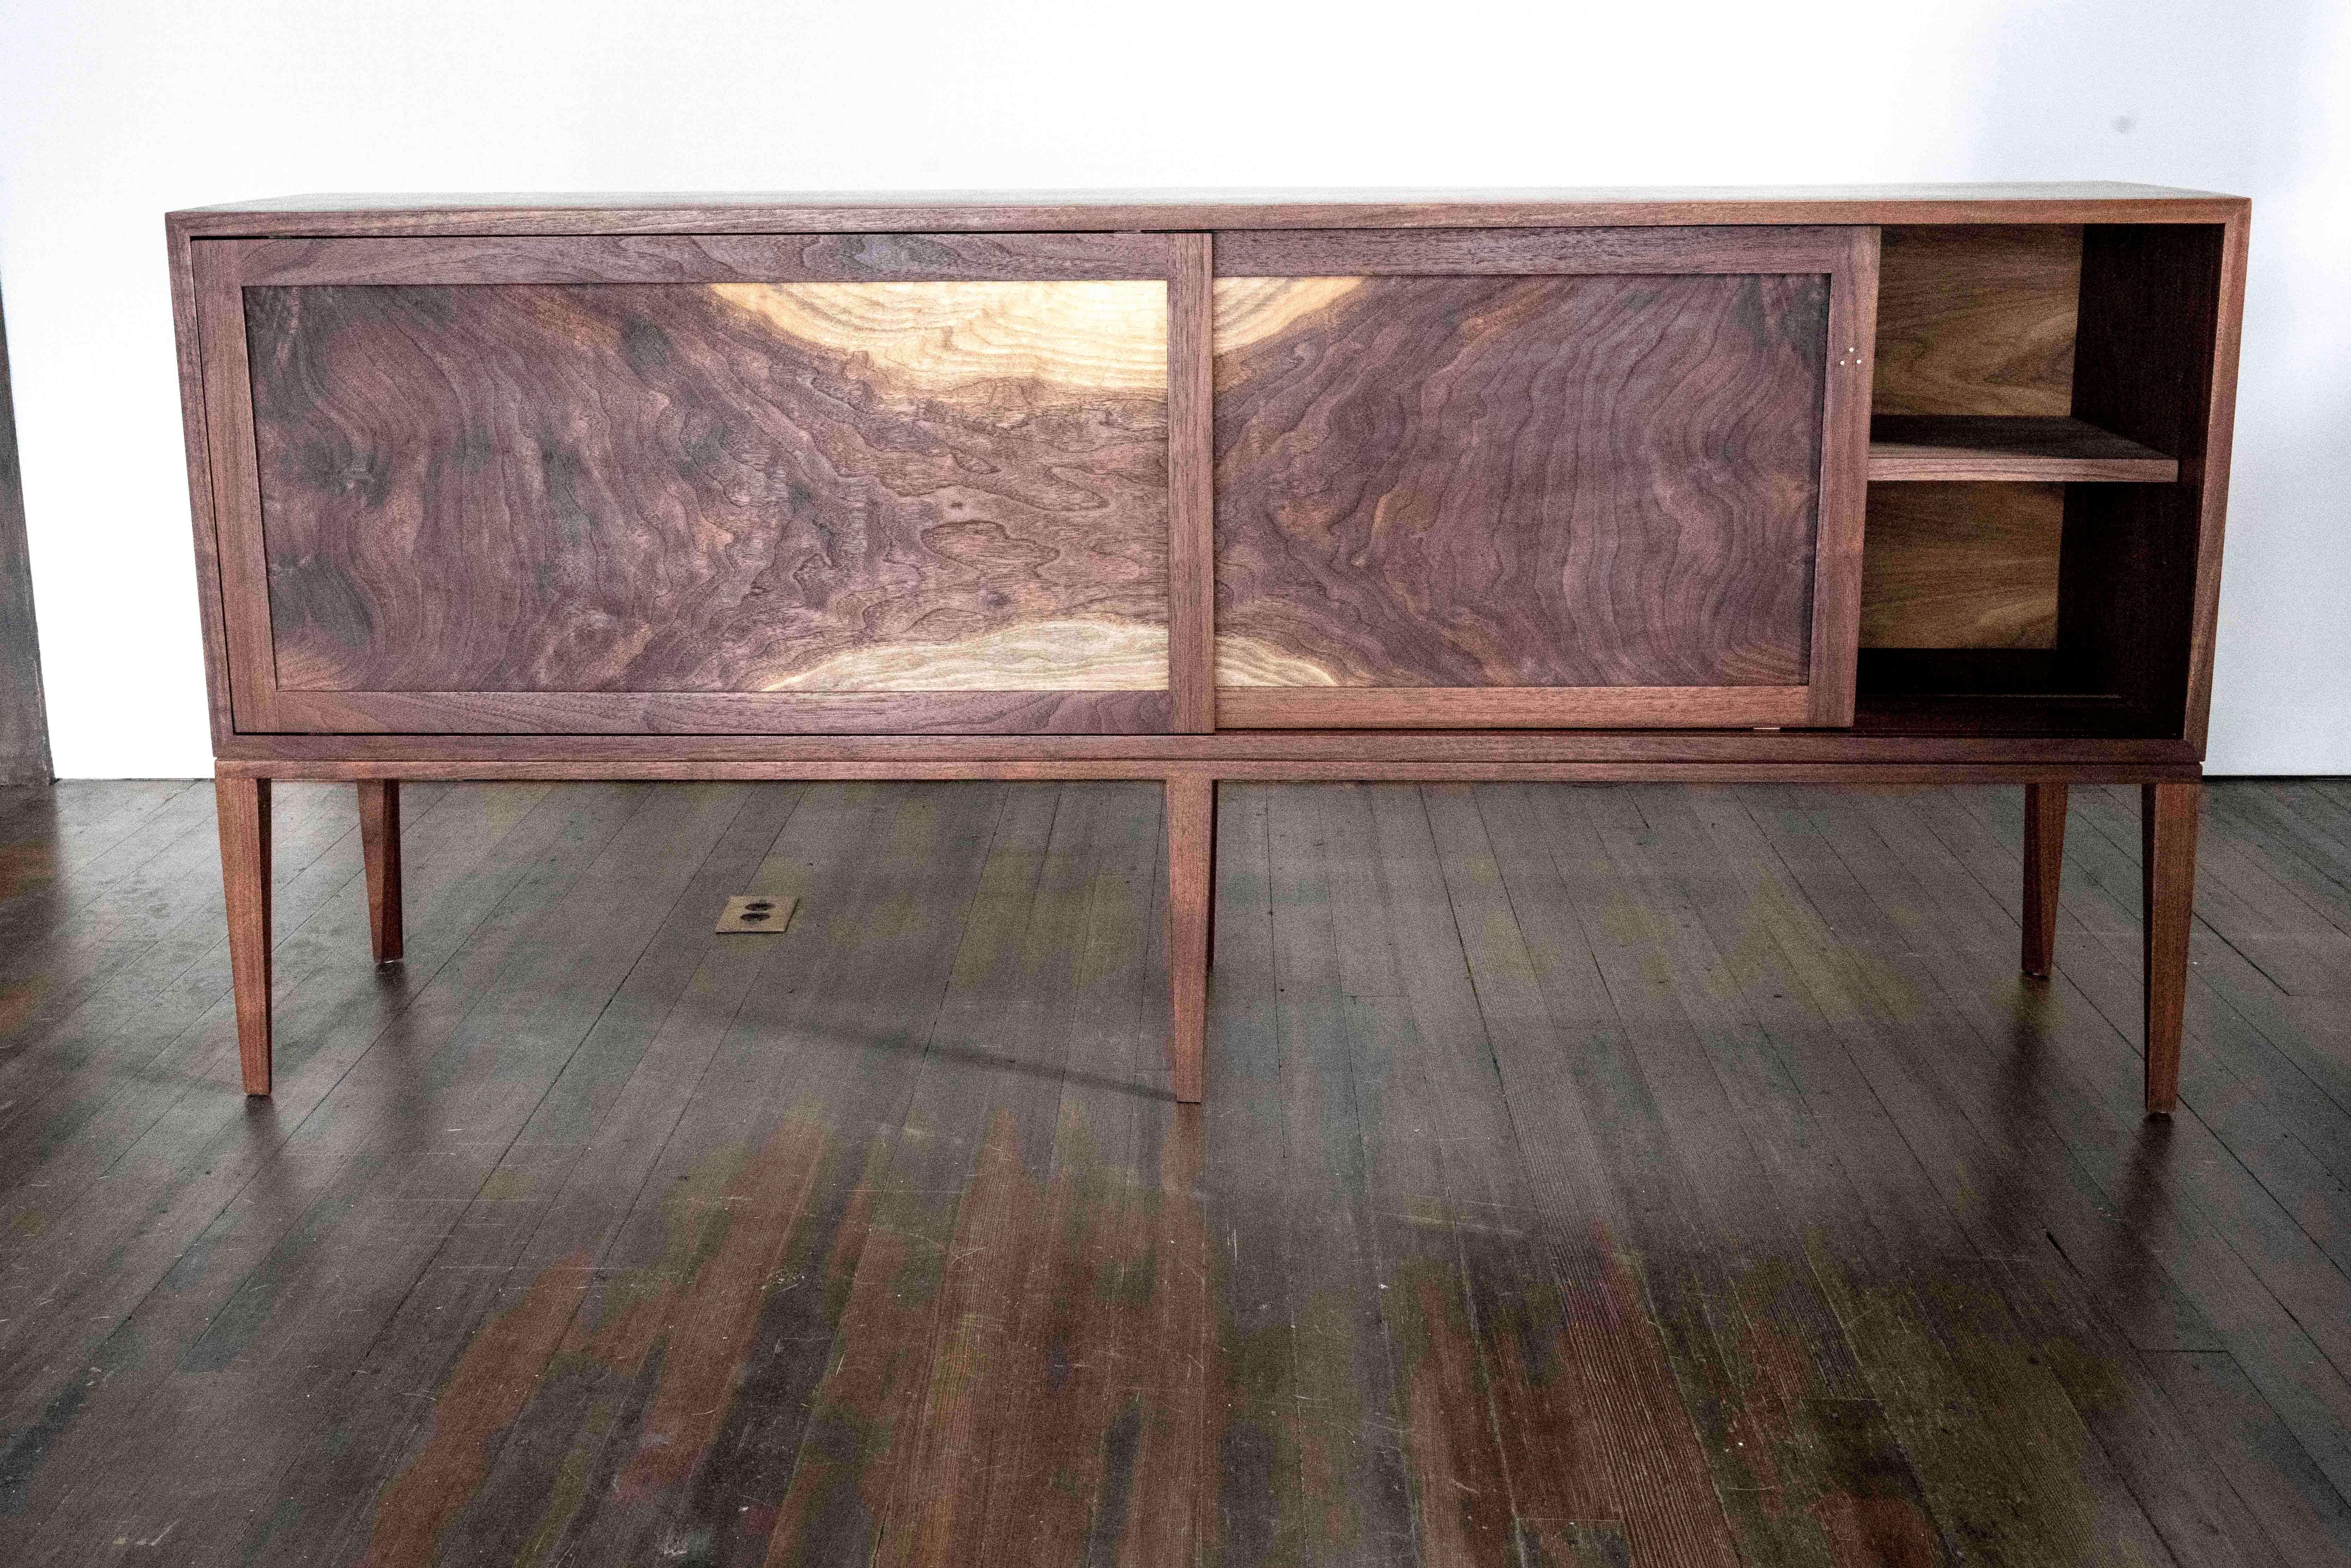 Modern Delta Cabinet in Walnut and Copper with Sliding Doors and Tapering Faceted Legs